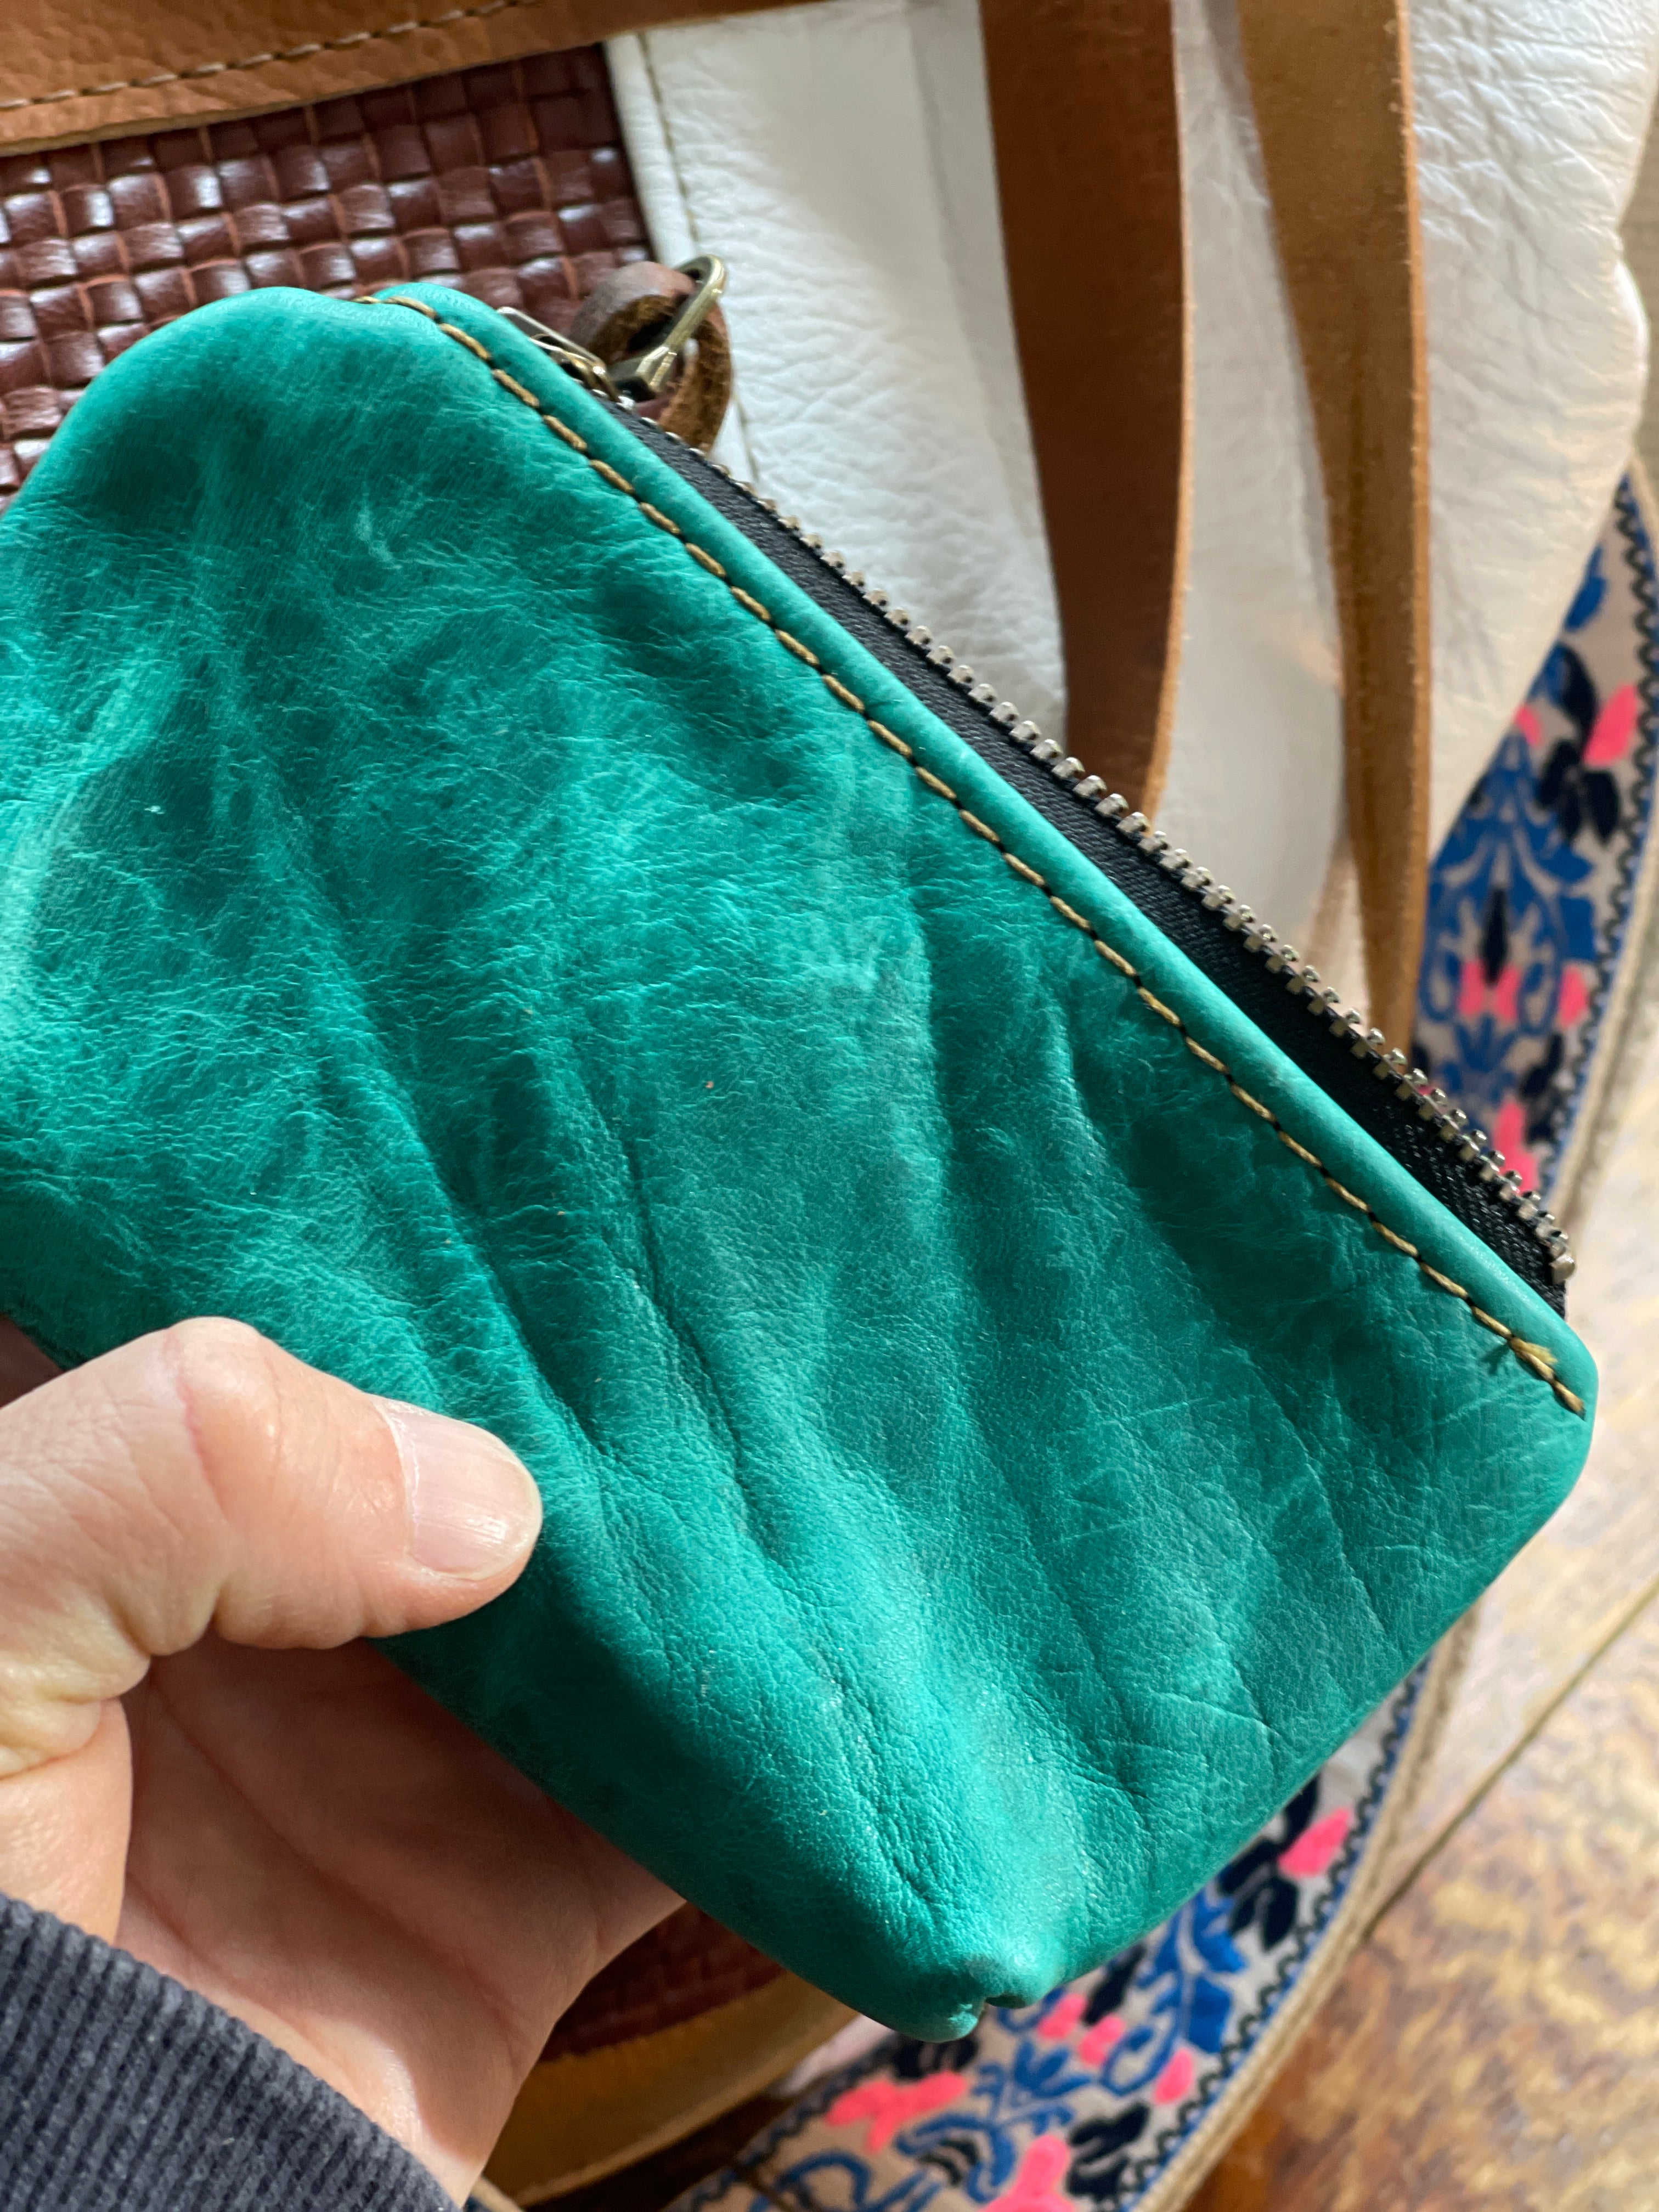 Turquoise Leather Pouch with Flower